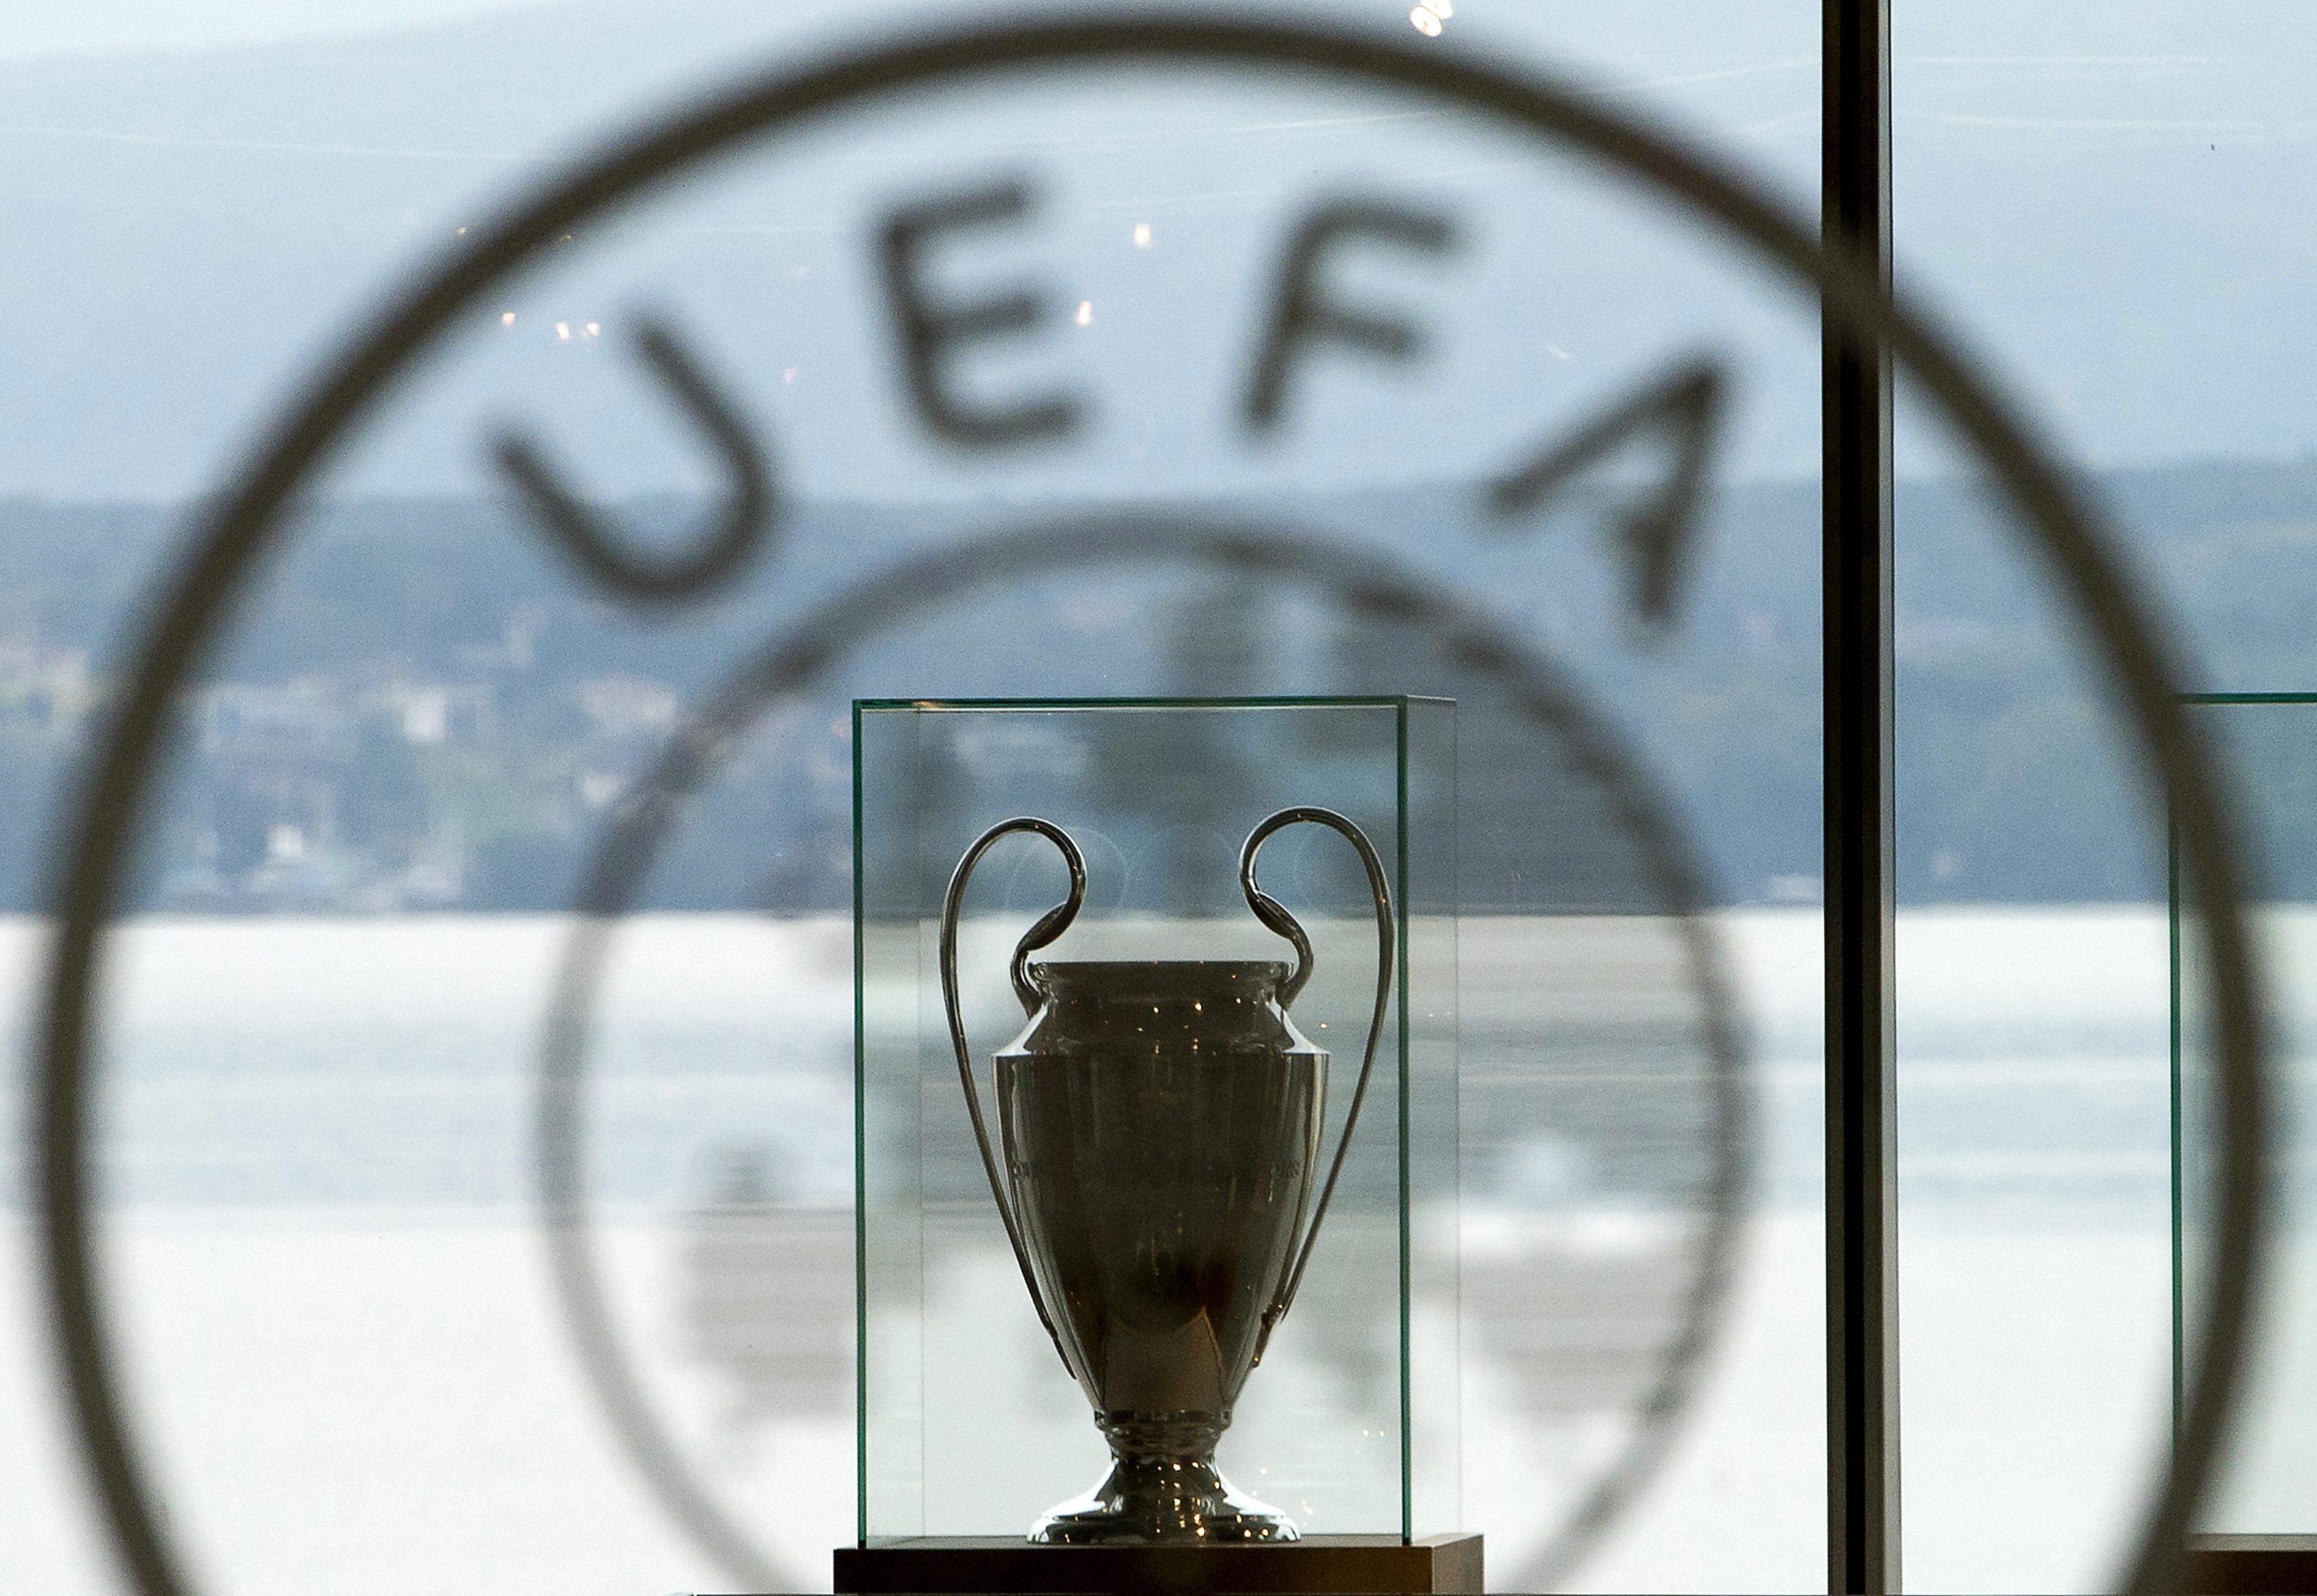 epa05246551 (FILE) The UEFA Champions League trophy displayed at the UEFA headquarters in Nyon, Switzerland, 18 September 2014. Swiss federal police raided UEFA offices in Nyon 06 April 2016 in relation to Tv contract details leaked in the Panama Papers.  EPA/JEAN-CHRISTOPHE BOTT